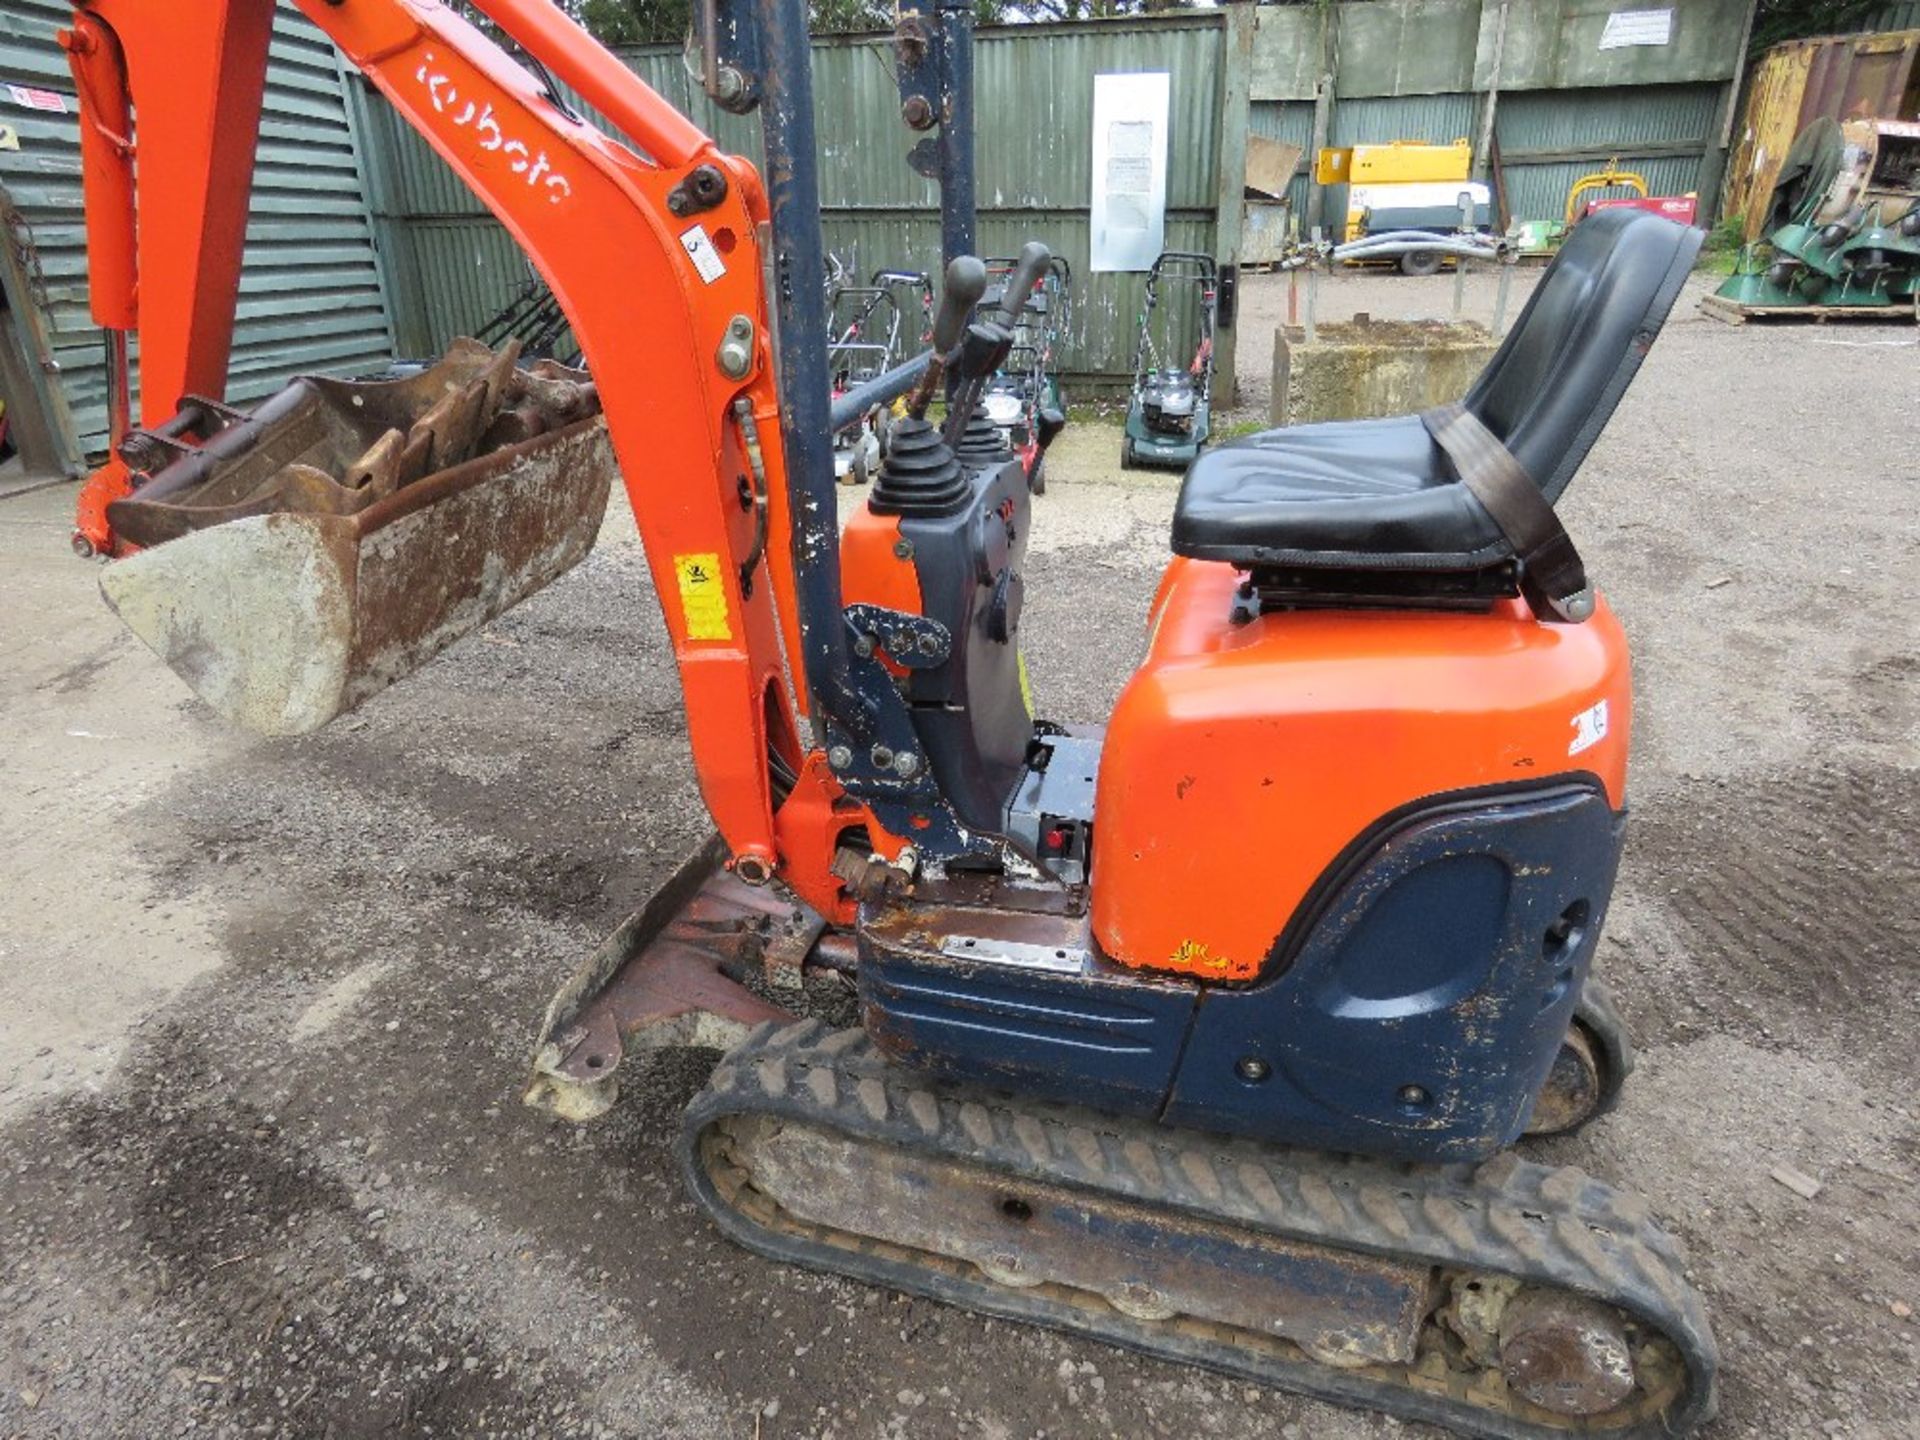 KUBOTA 008 MICRO EXCAVATOR, PURCHASED NEW IN 2005 BY VENDOR, WITH 3NO BUCKETS. SN:12930. DIRECT FROM